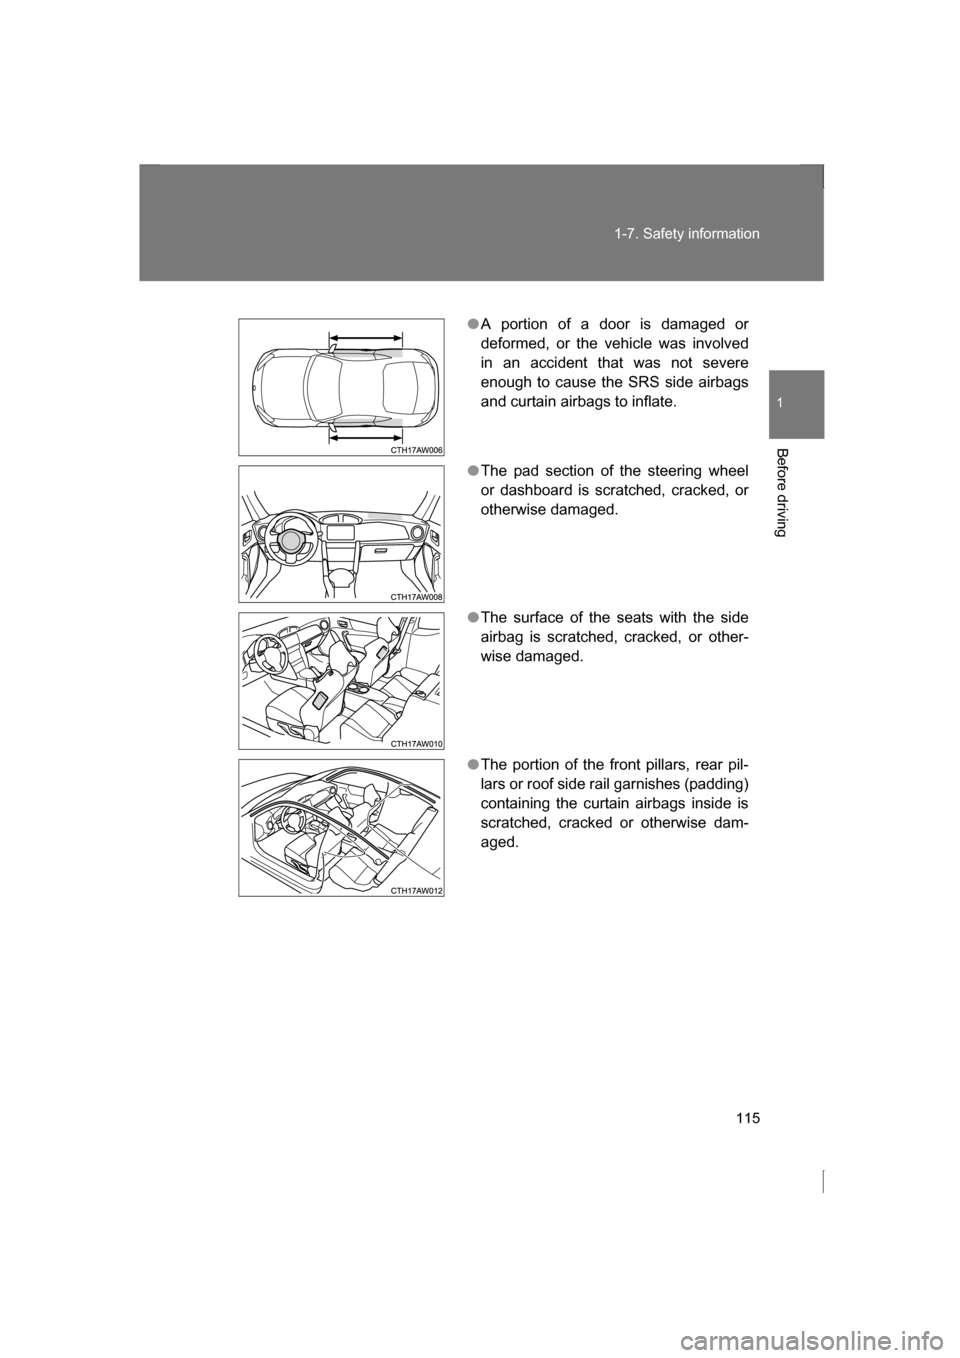 SUBARU BRZ 2013 1.G Owners Guide 115
1-7. Safety information
1
Before driving
●A portion of a door is damaged or 
deformed, or the vehicle was involved
in an accident that was not severe
enough to cause the SRS side airbags
and cur